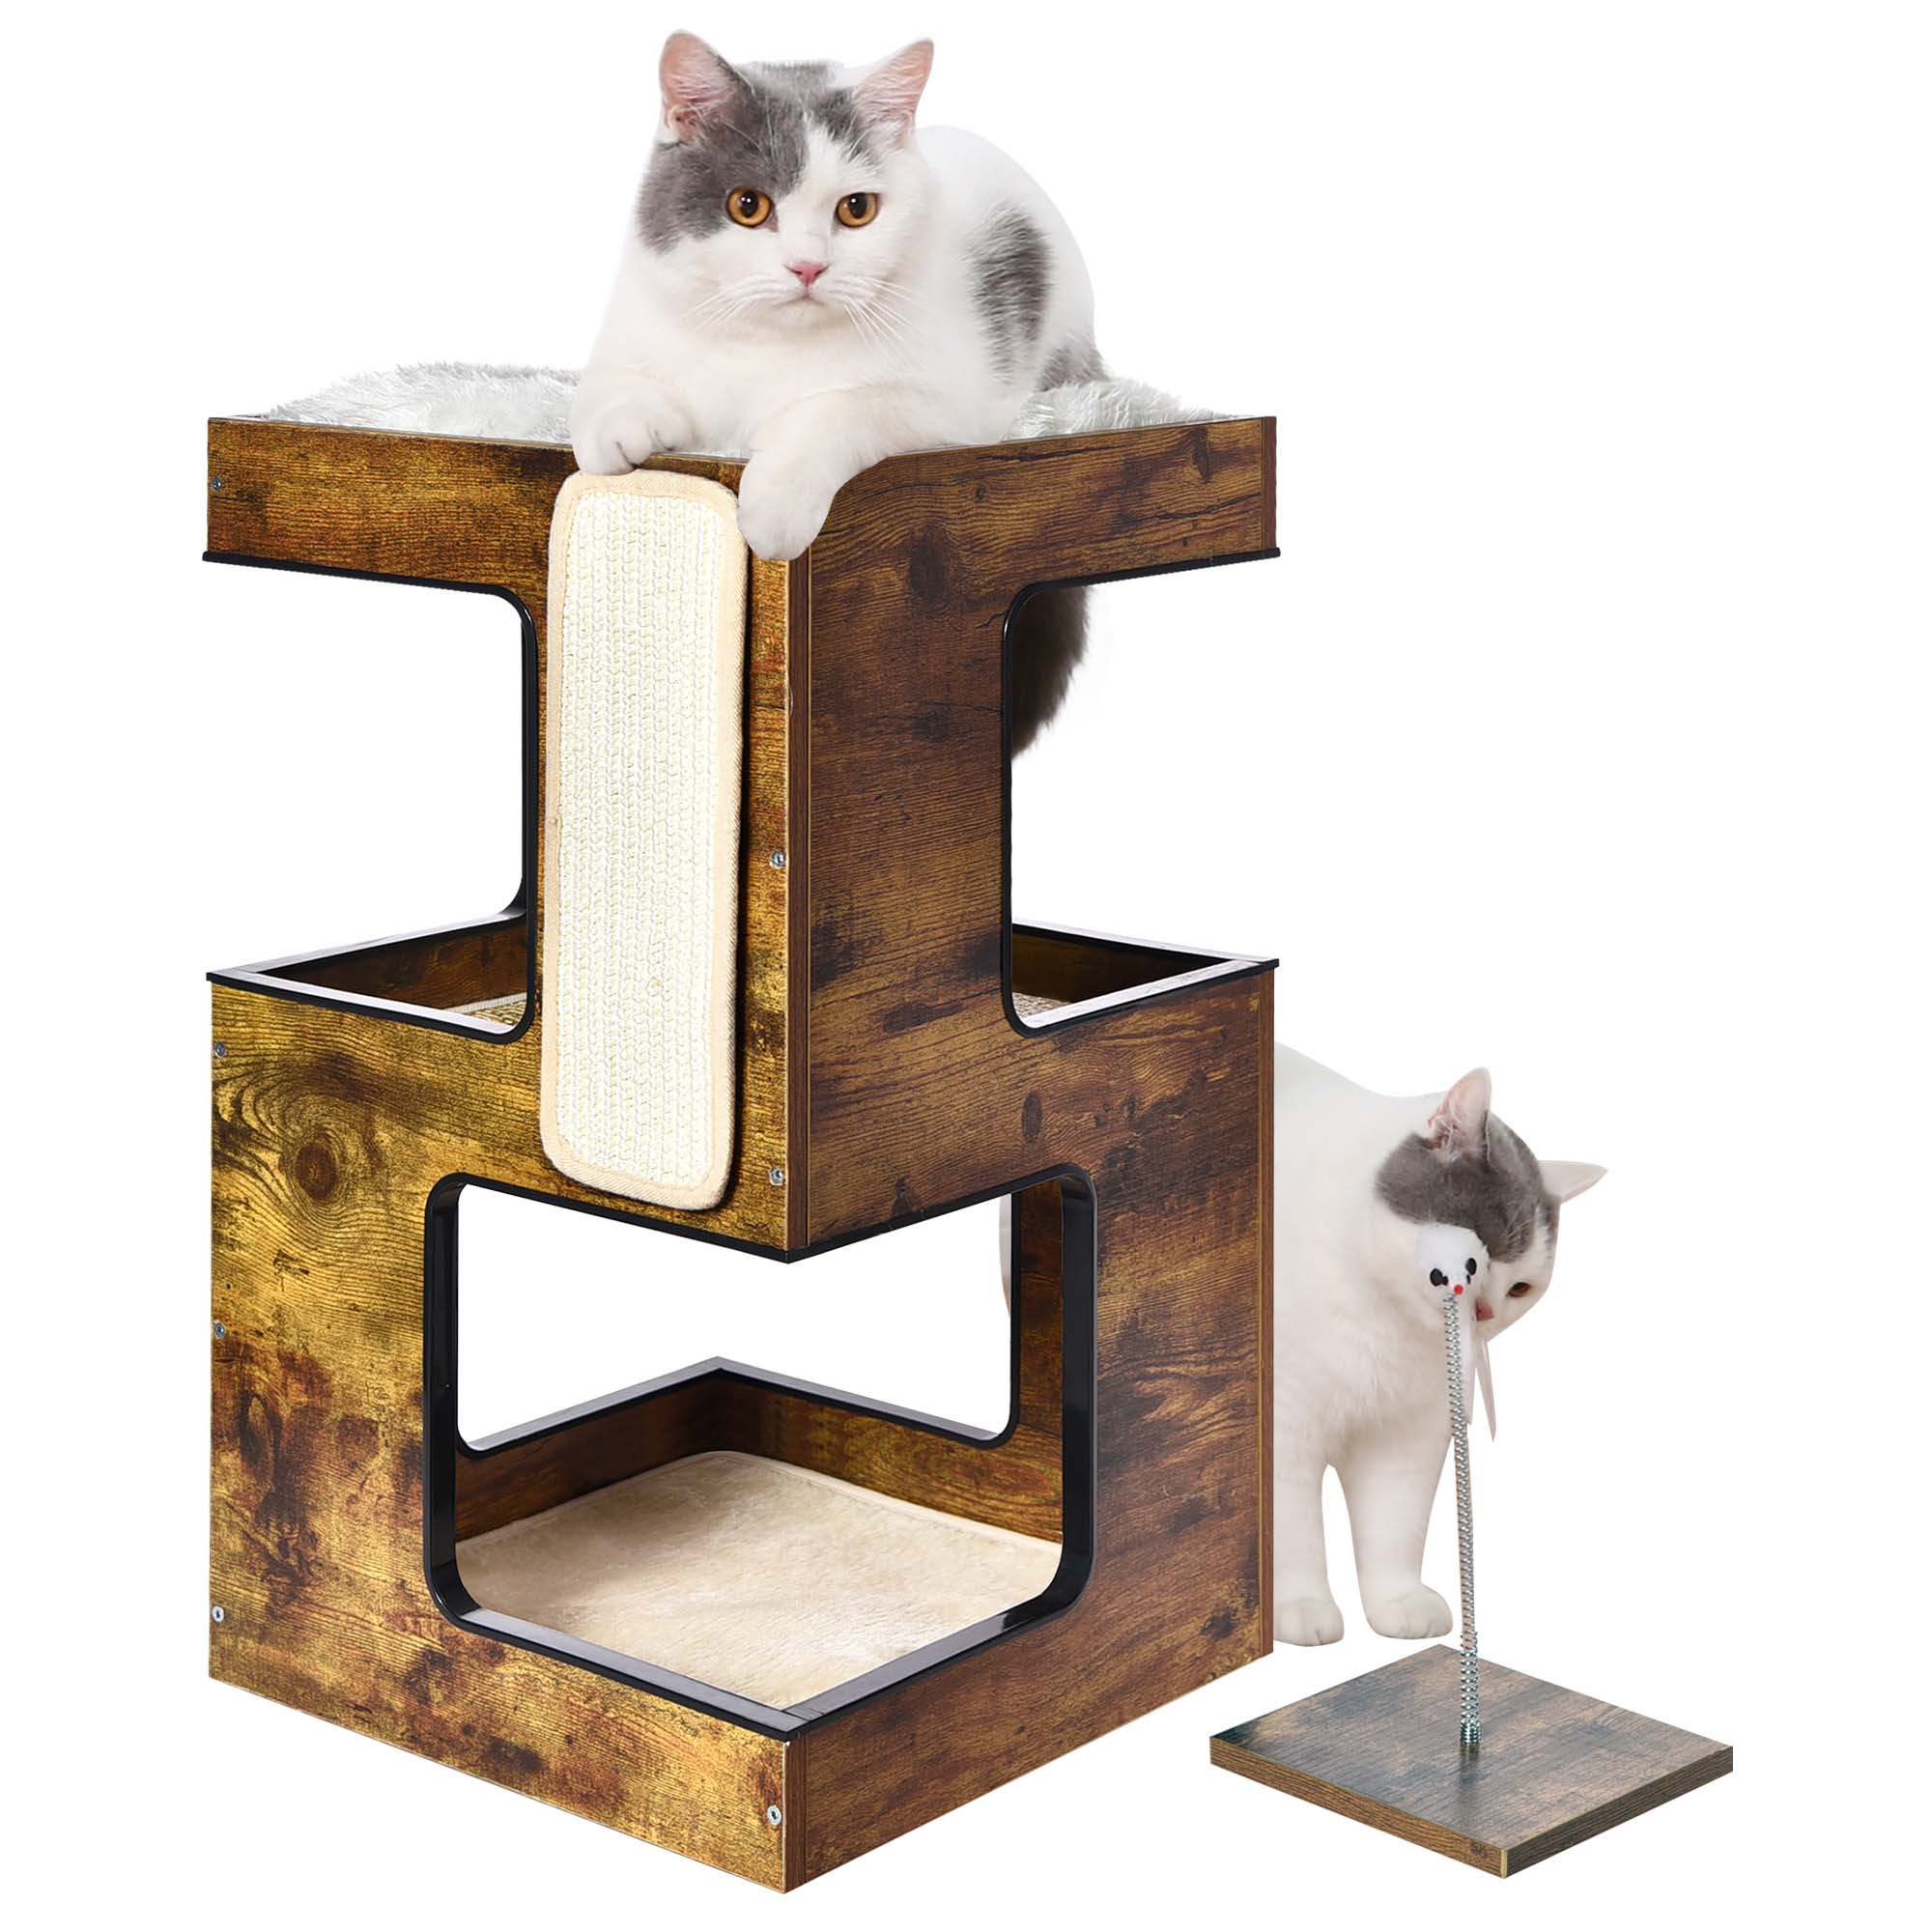 3-in-1 Wooden Cat Condo with Nightstand Function